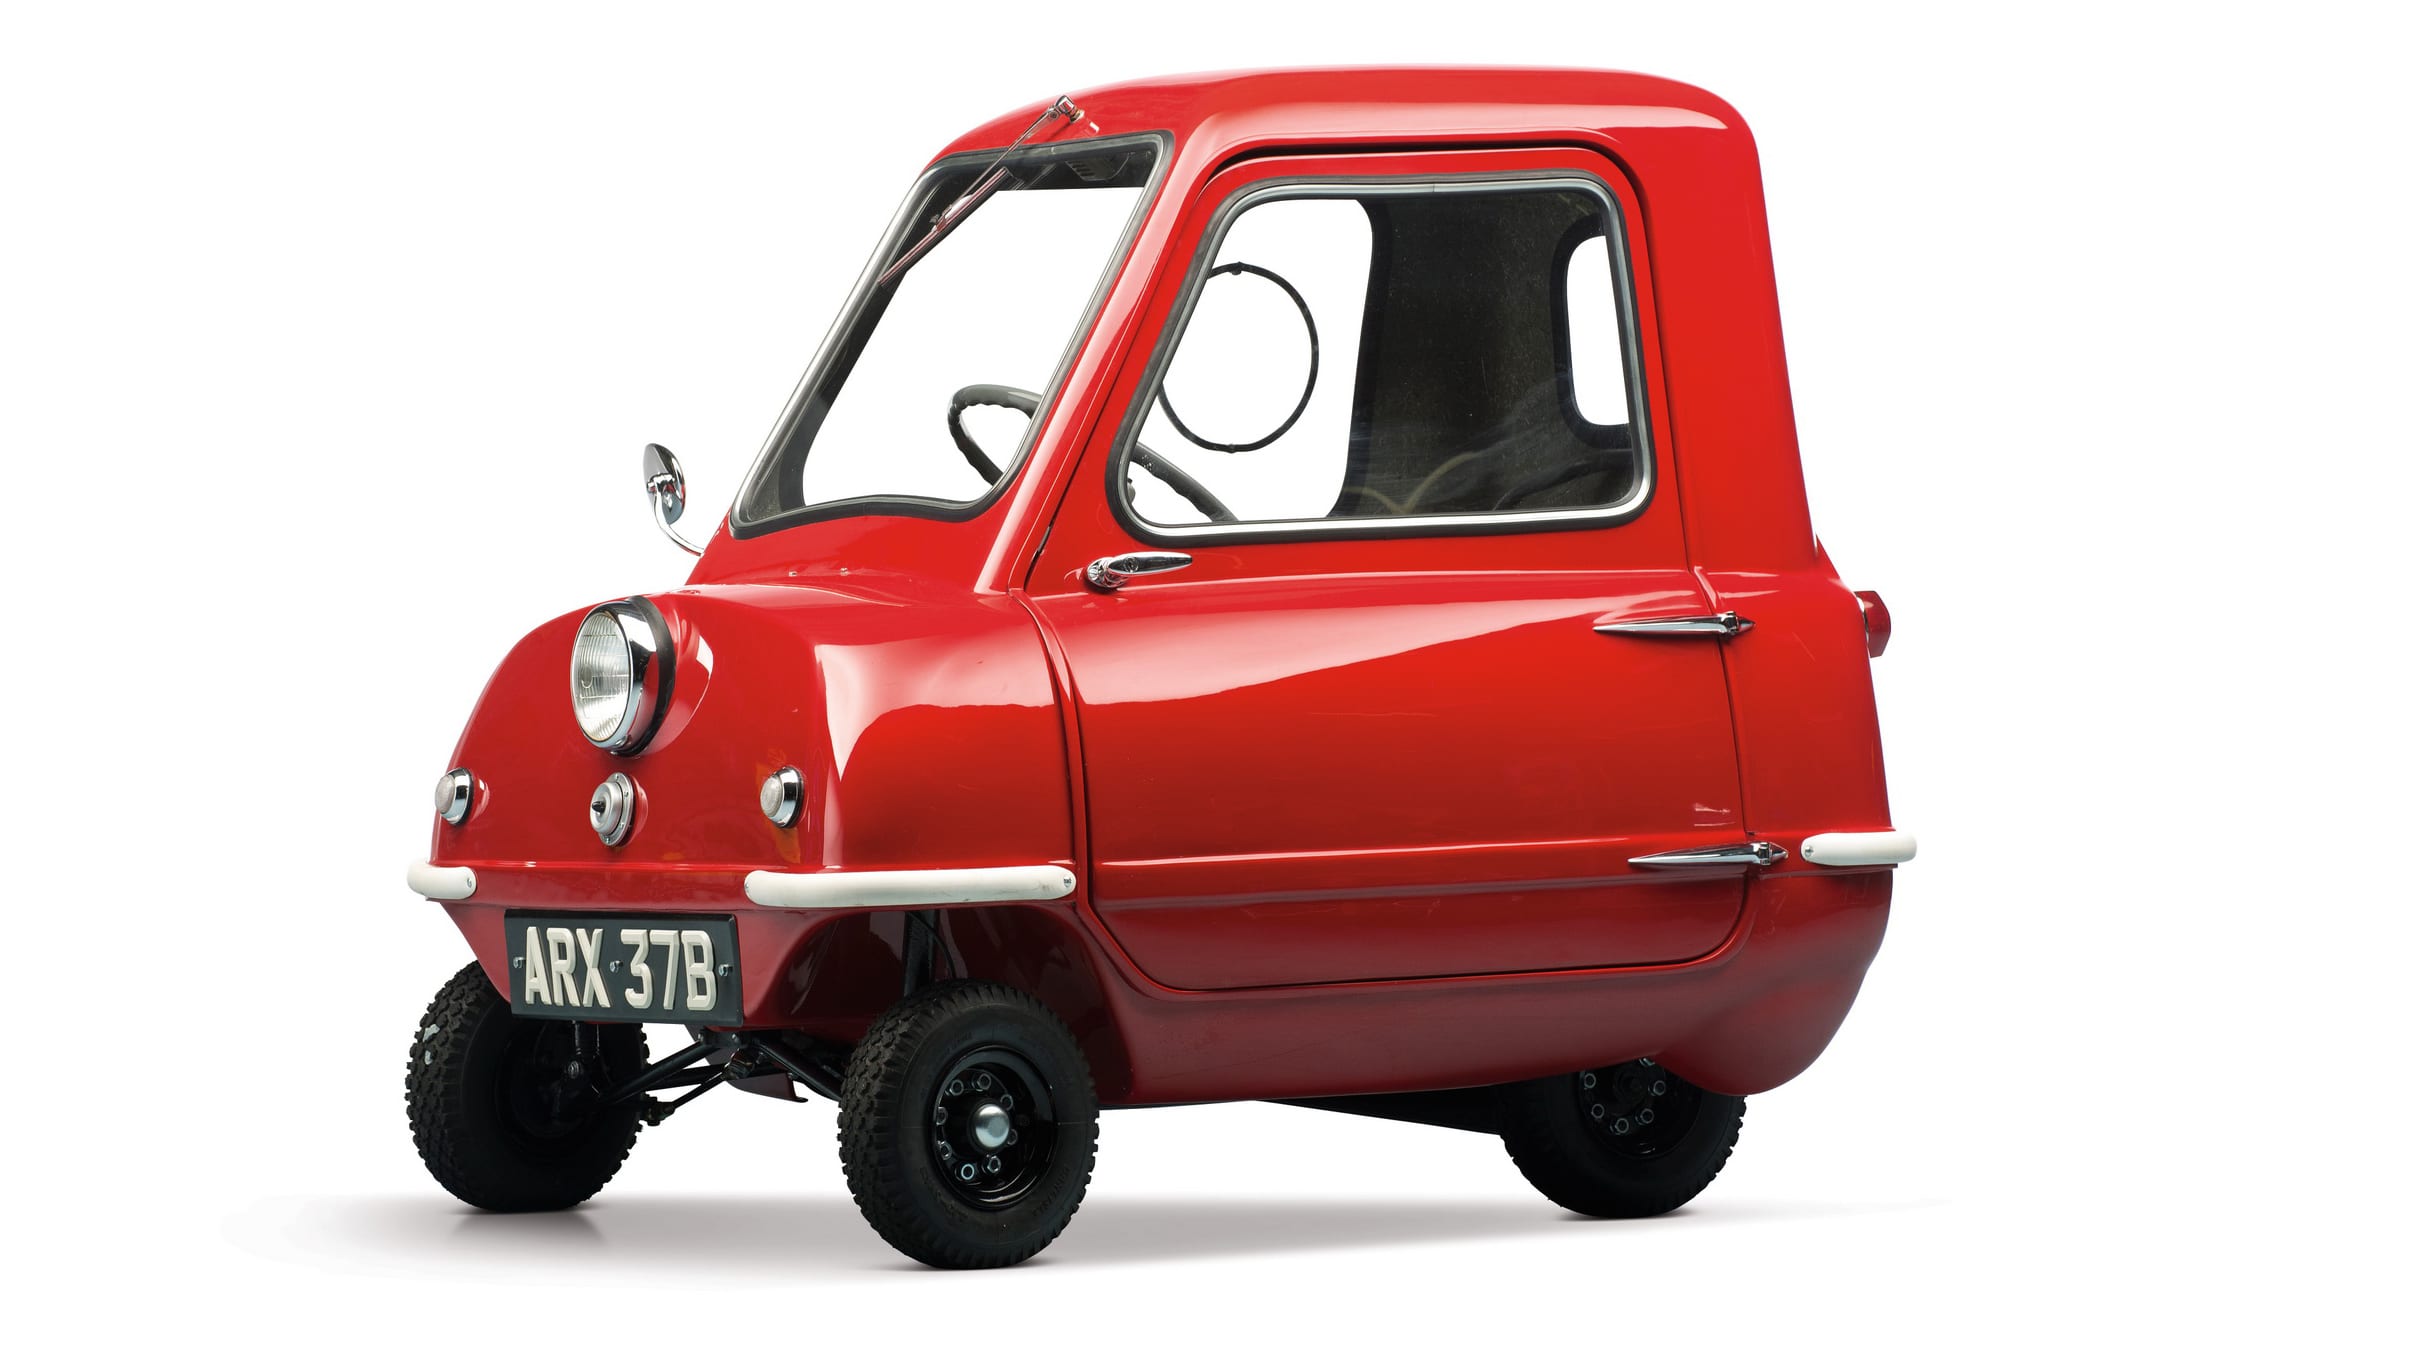 The smallest car ever made Drive